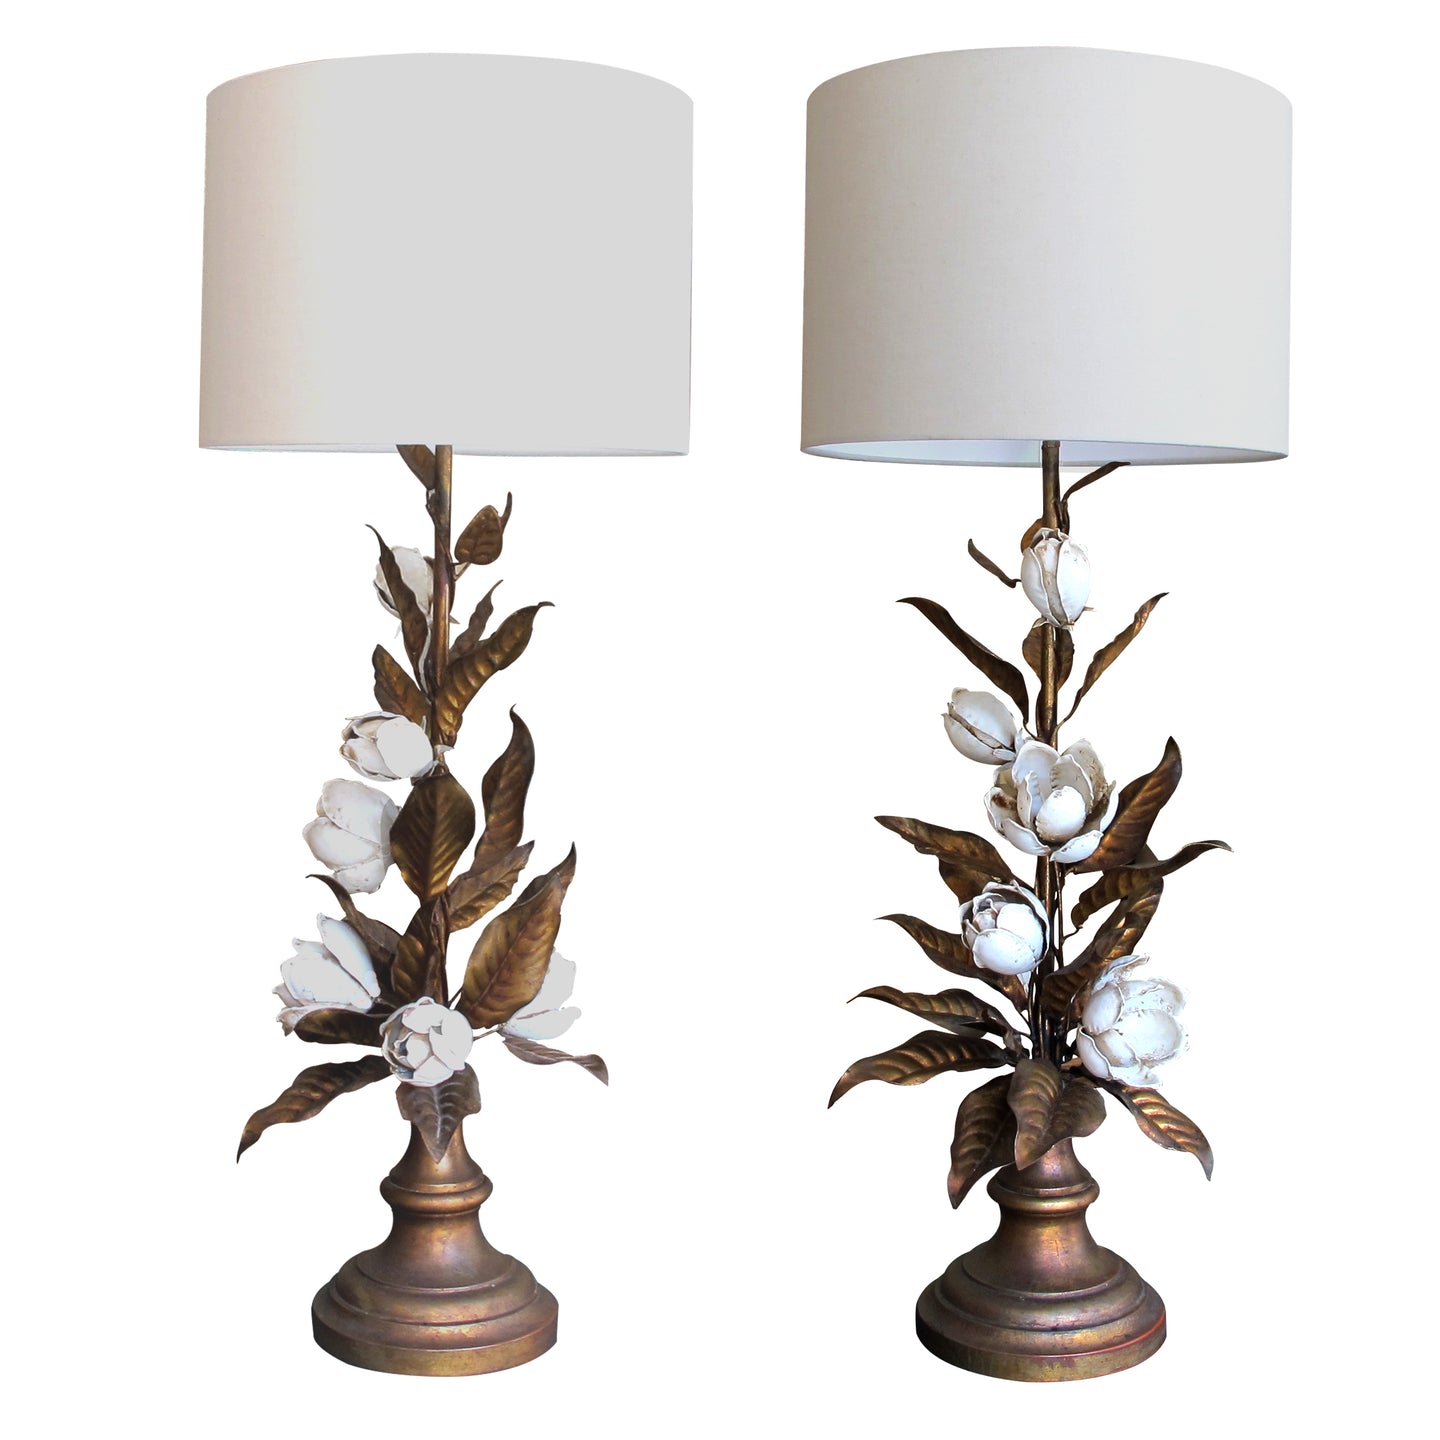 Italian 1950s Large Pair of Floral Toleware Table Lamps